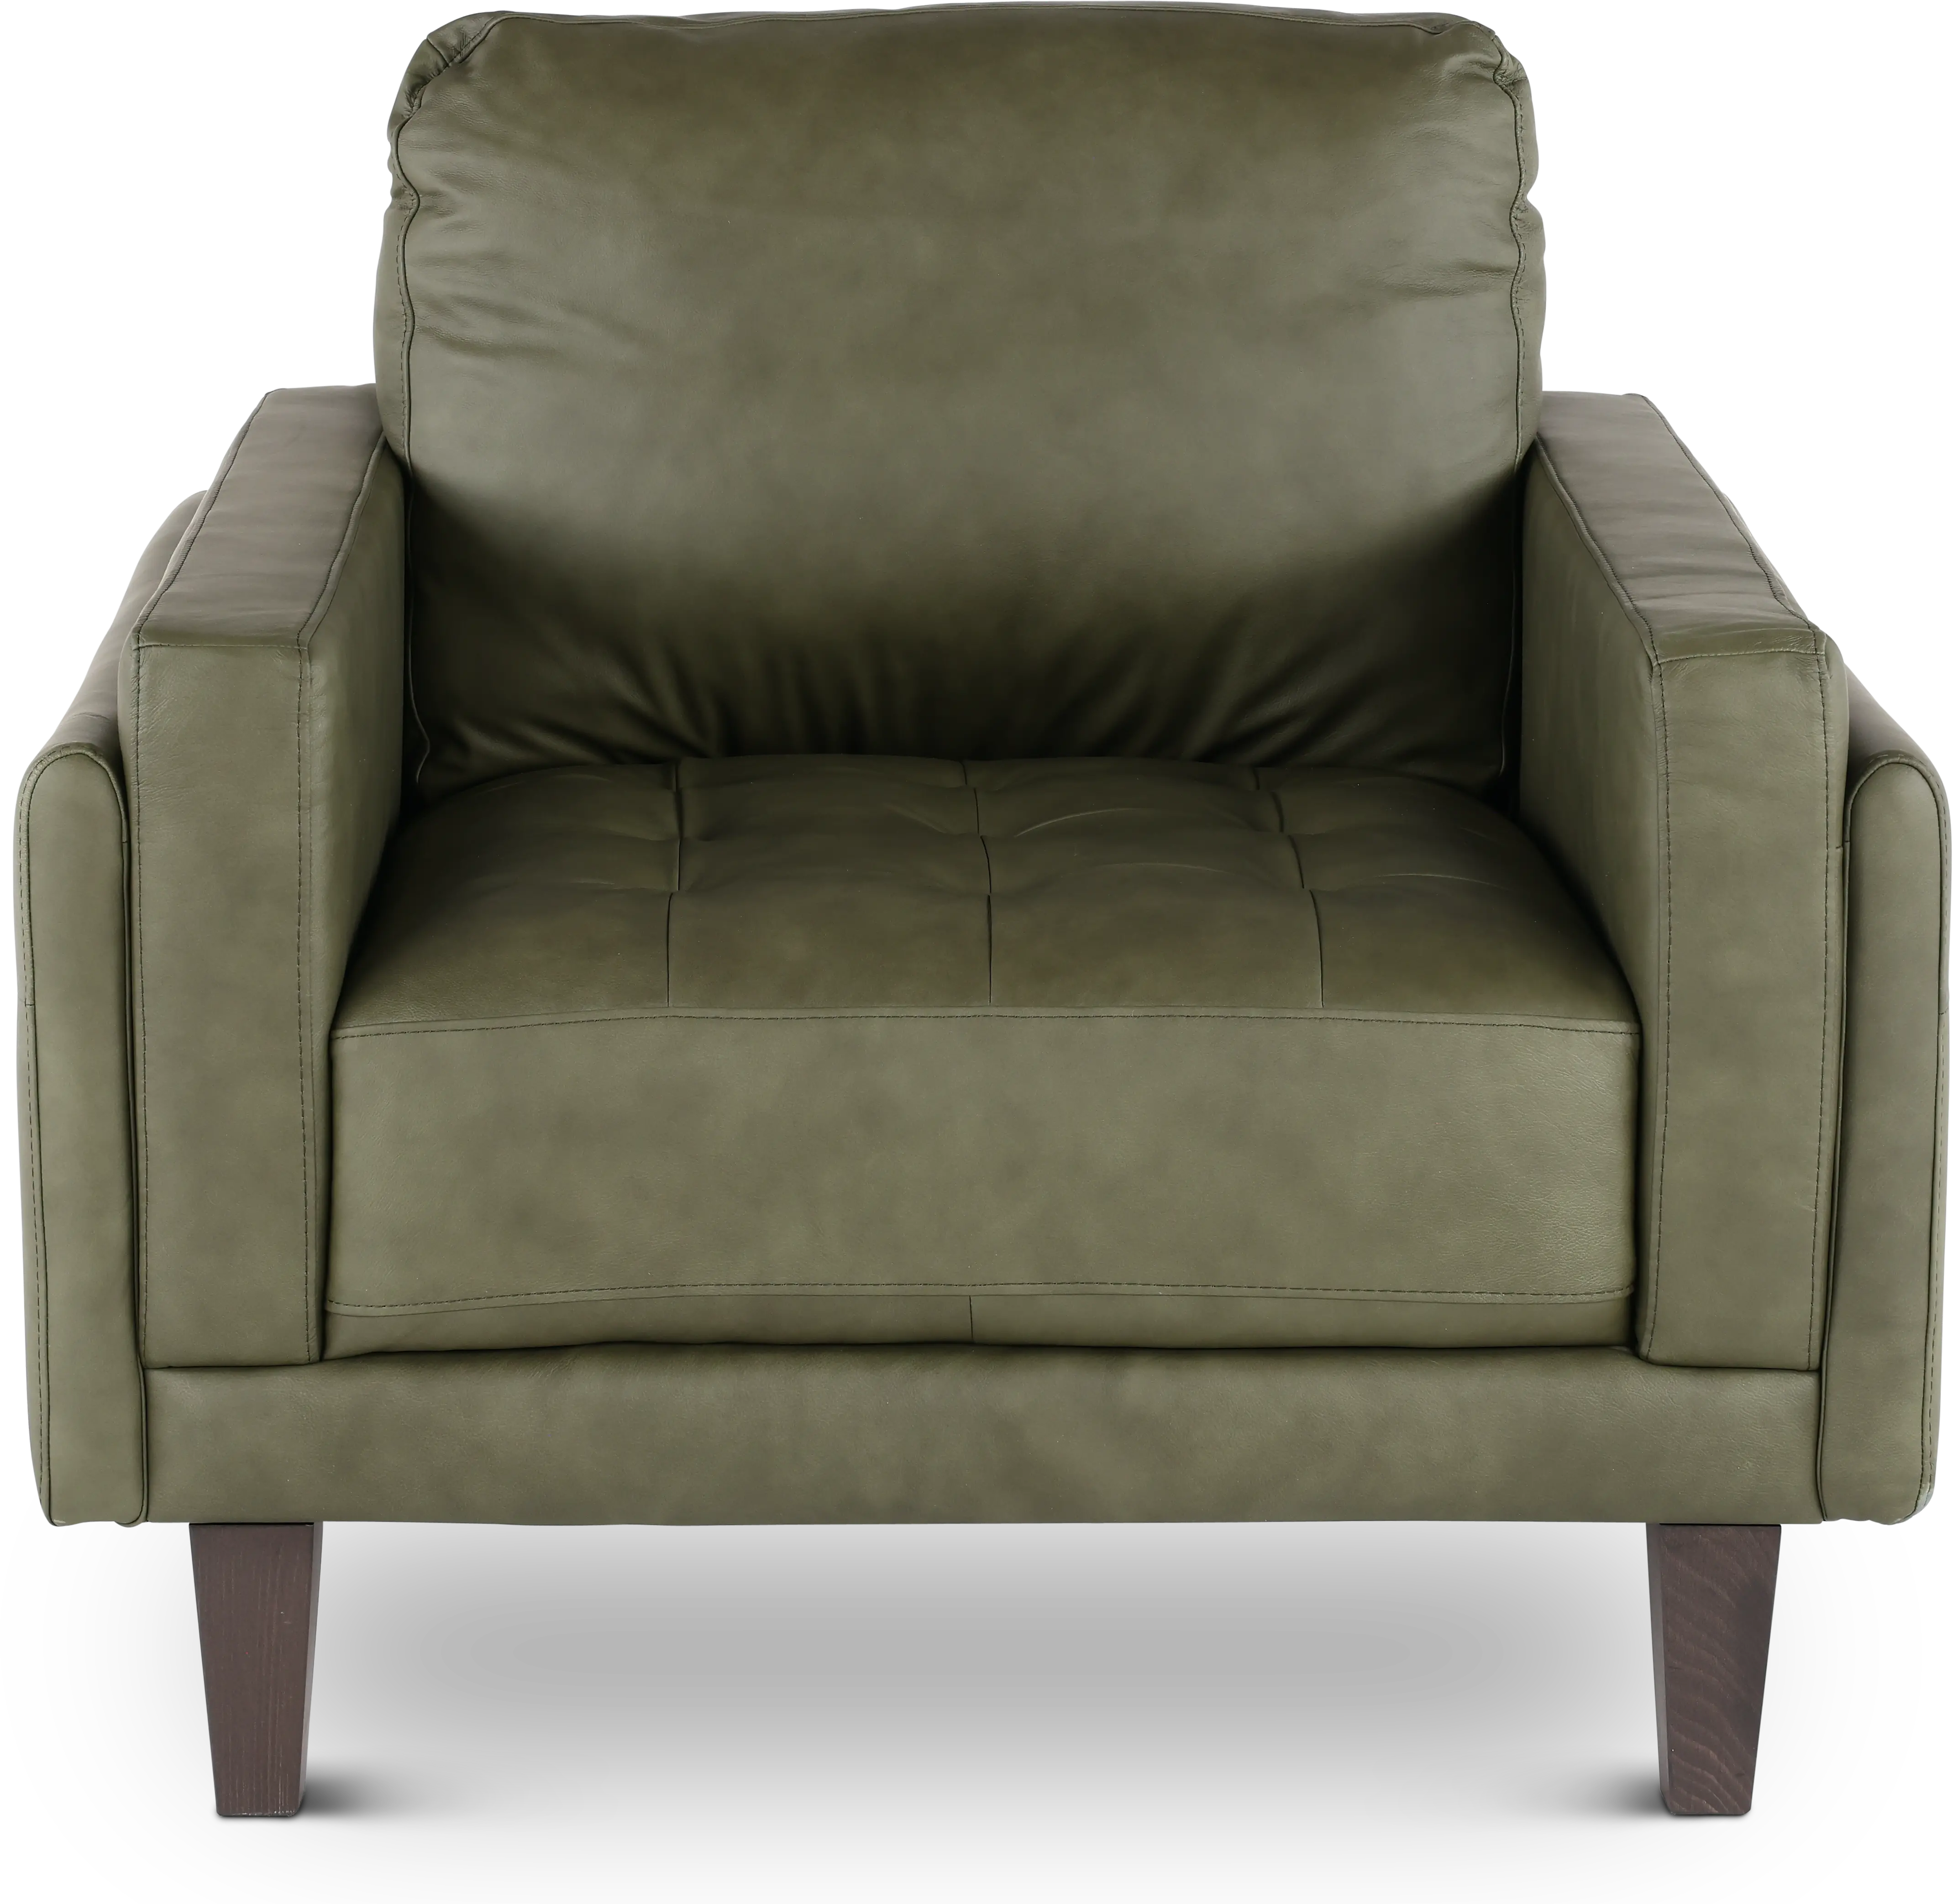 Guernsey Green Leather Chair